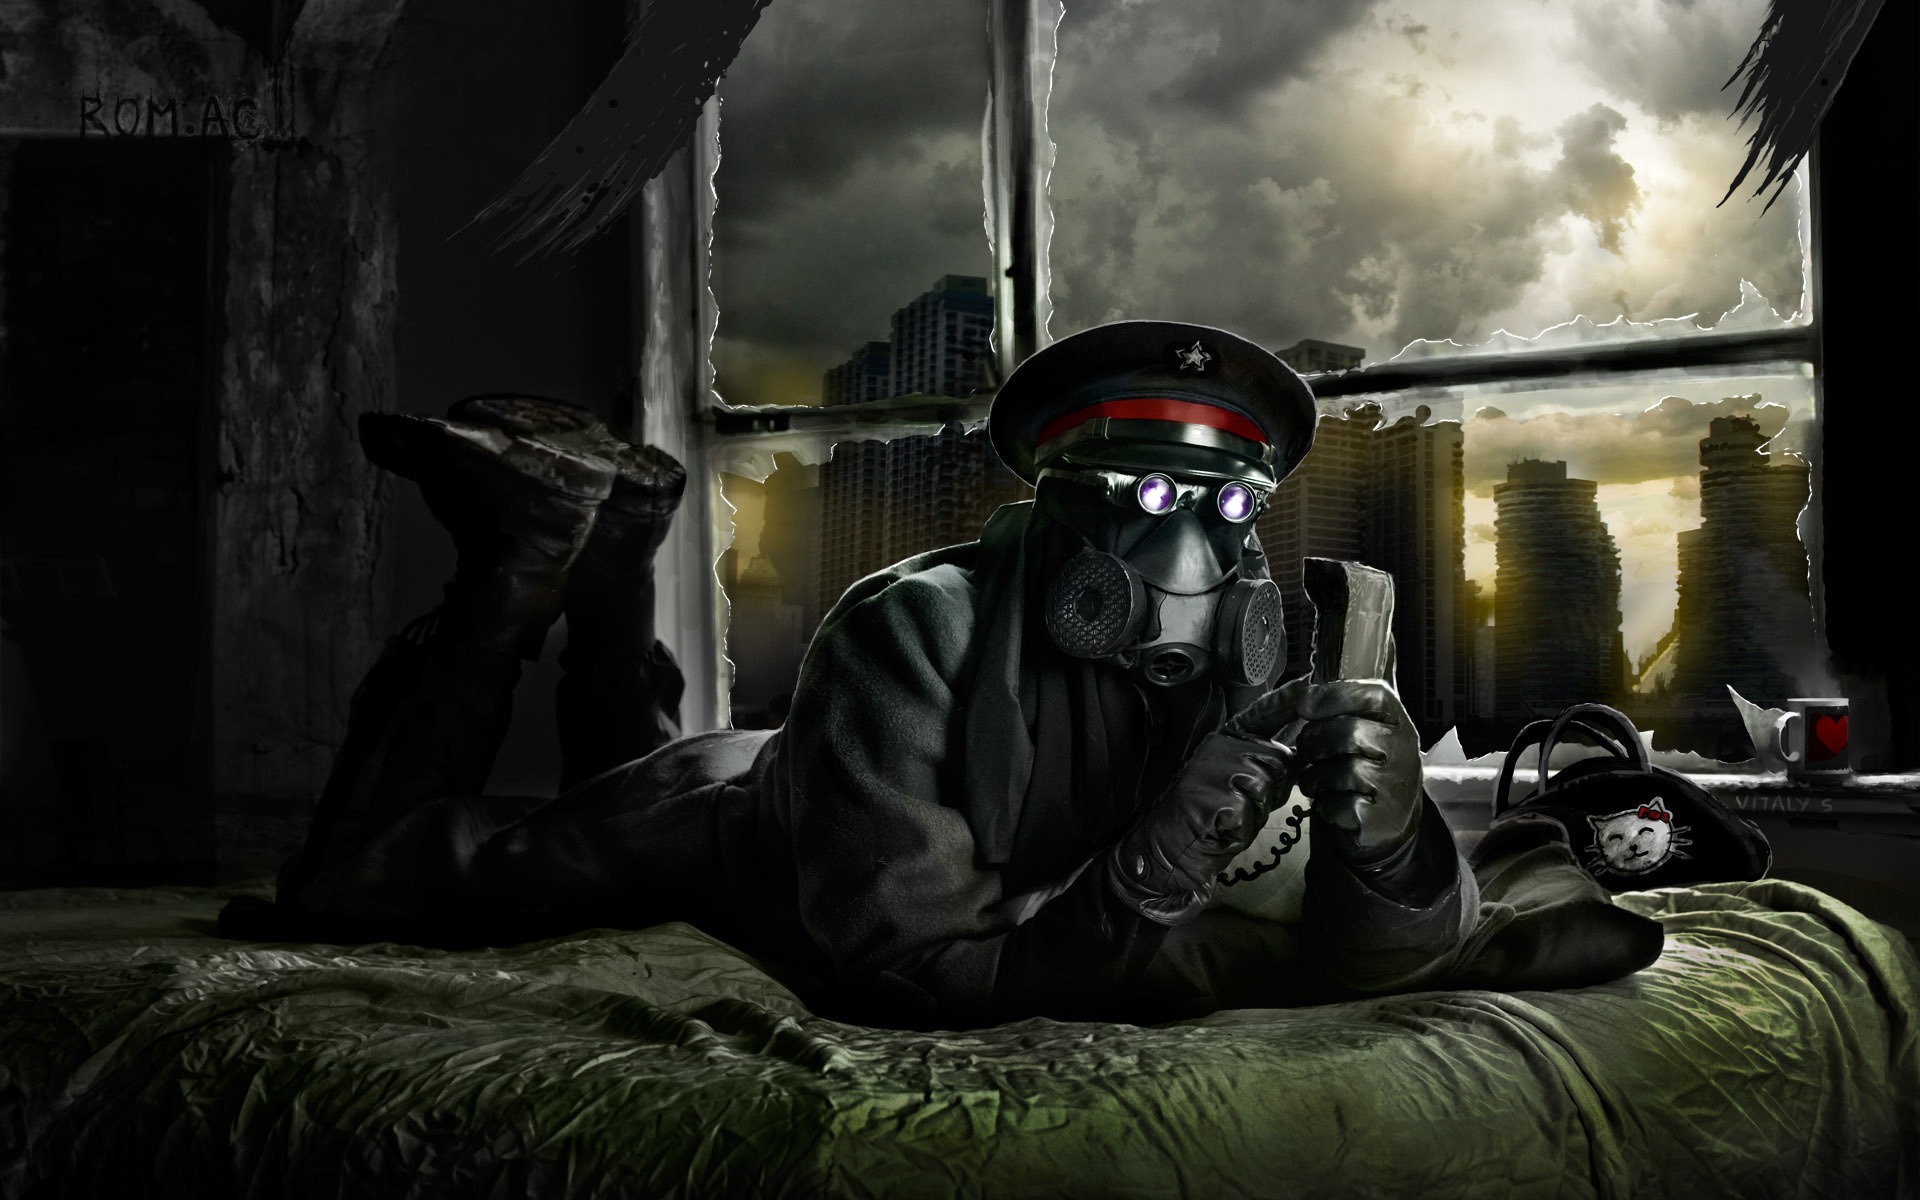 Romantically Apocalyptic creative painting wallpapers (2) #14 - 1920x1200